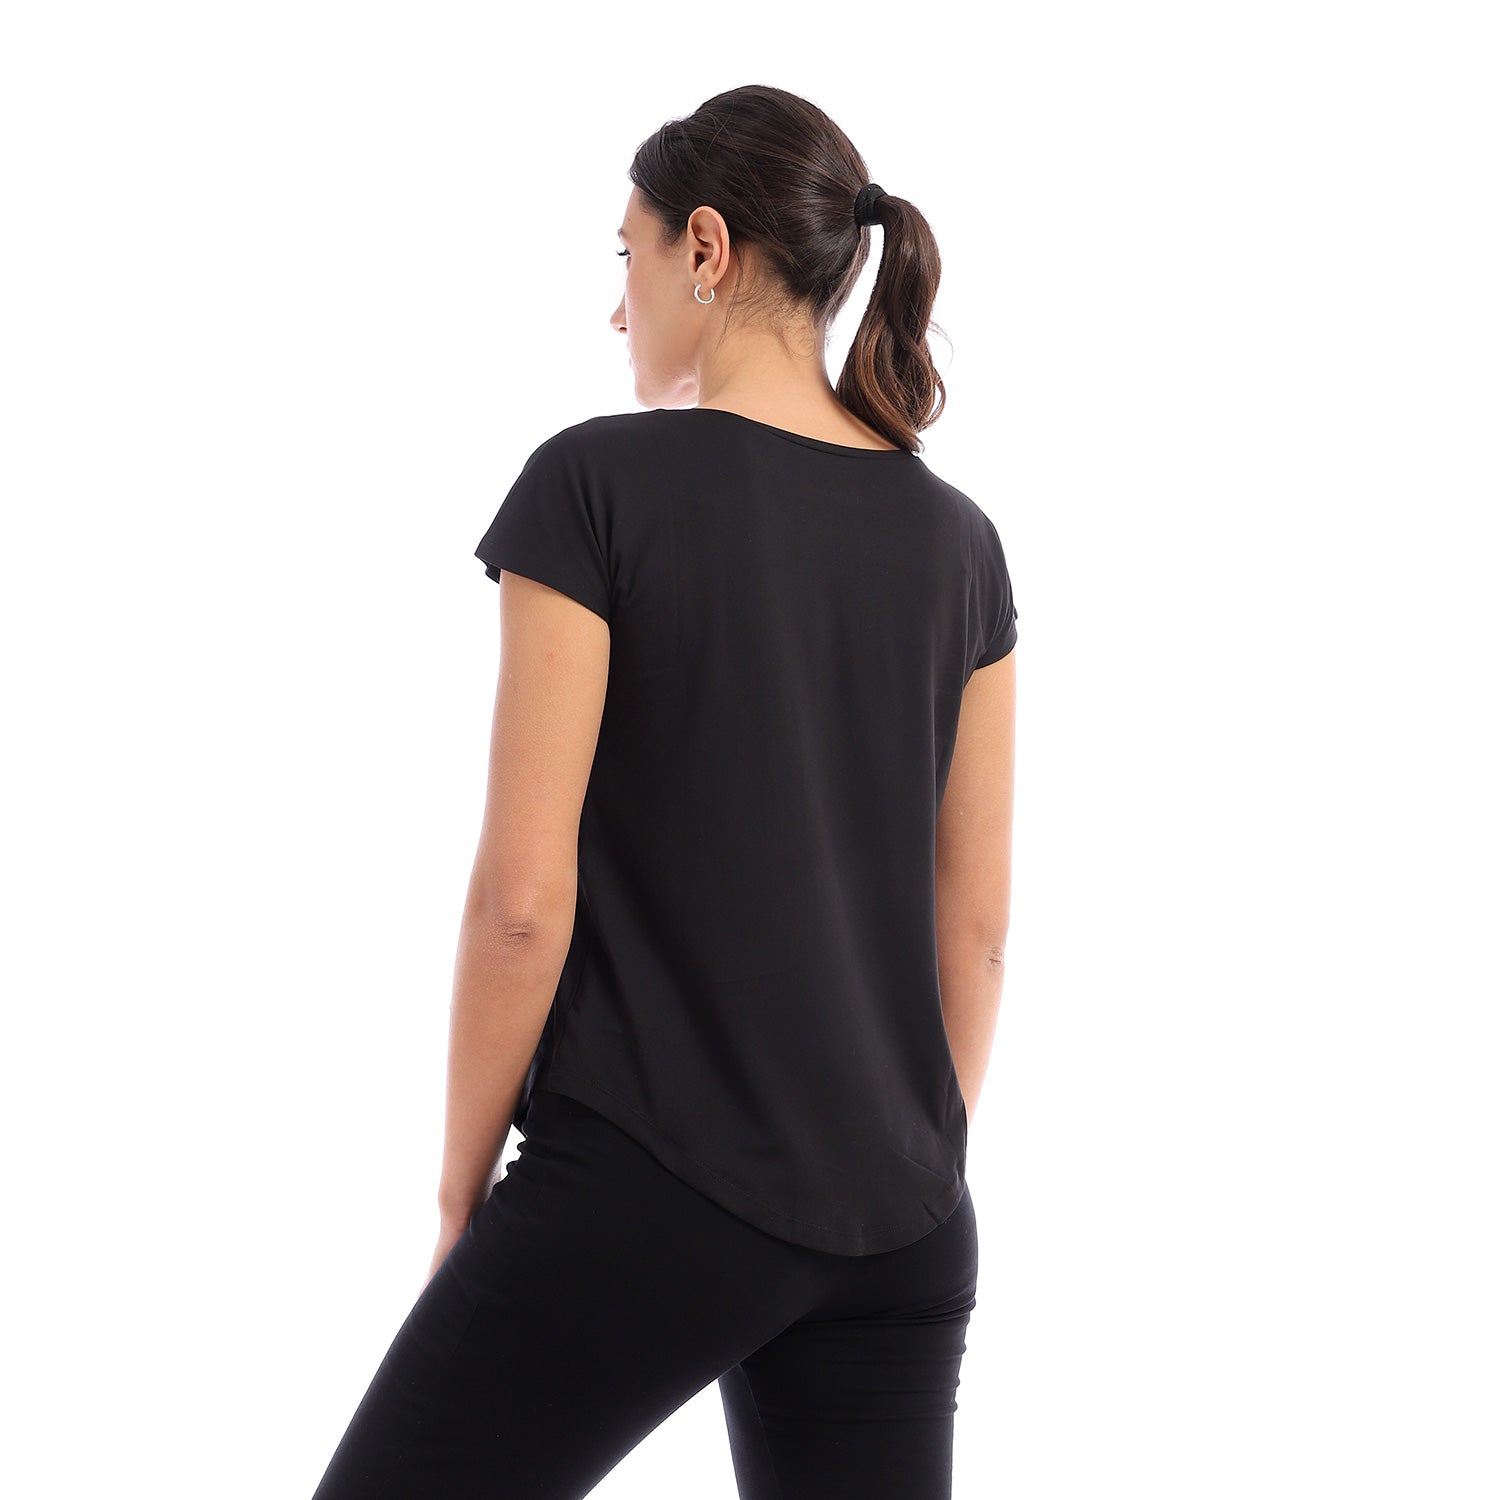 Loose Fit Workout Tee